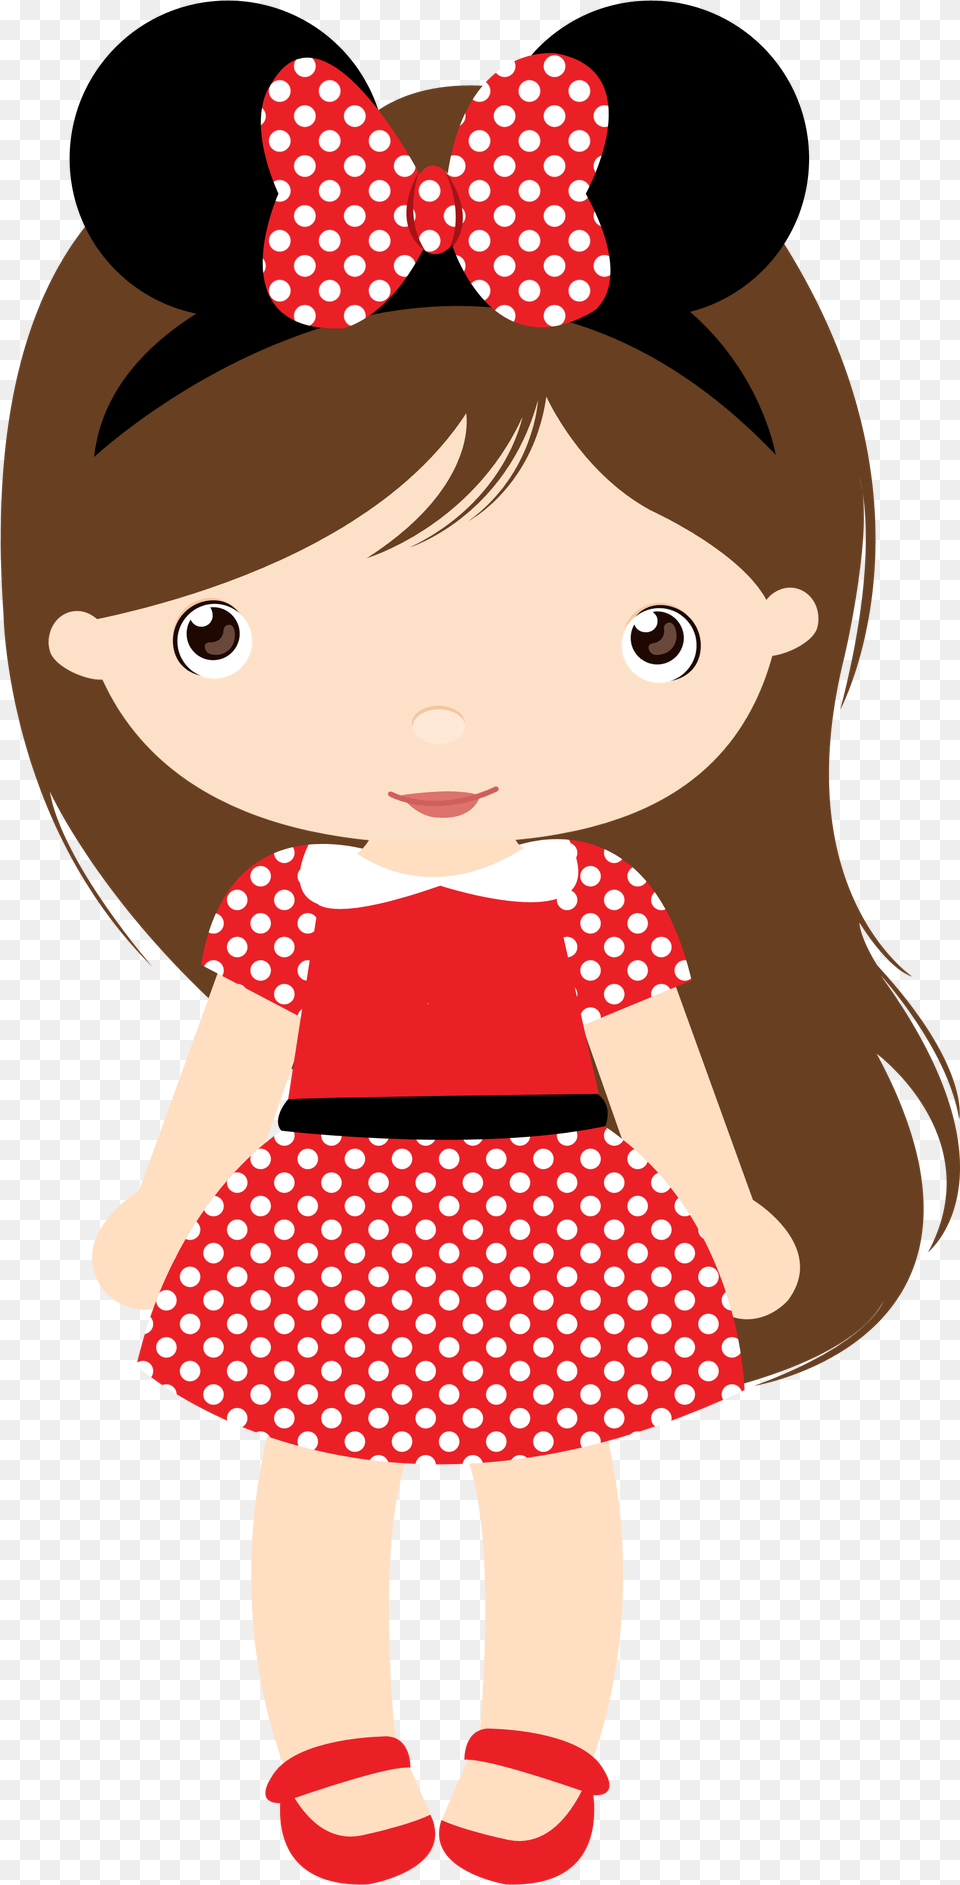 Pin Do Liran S Em Clipart Clipart Of Dolls Minnie Mouse, Accessories, Formal Wear, Pattern, Tie Free Png